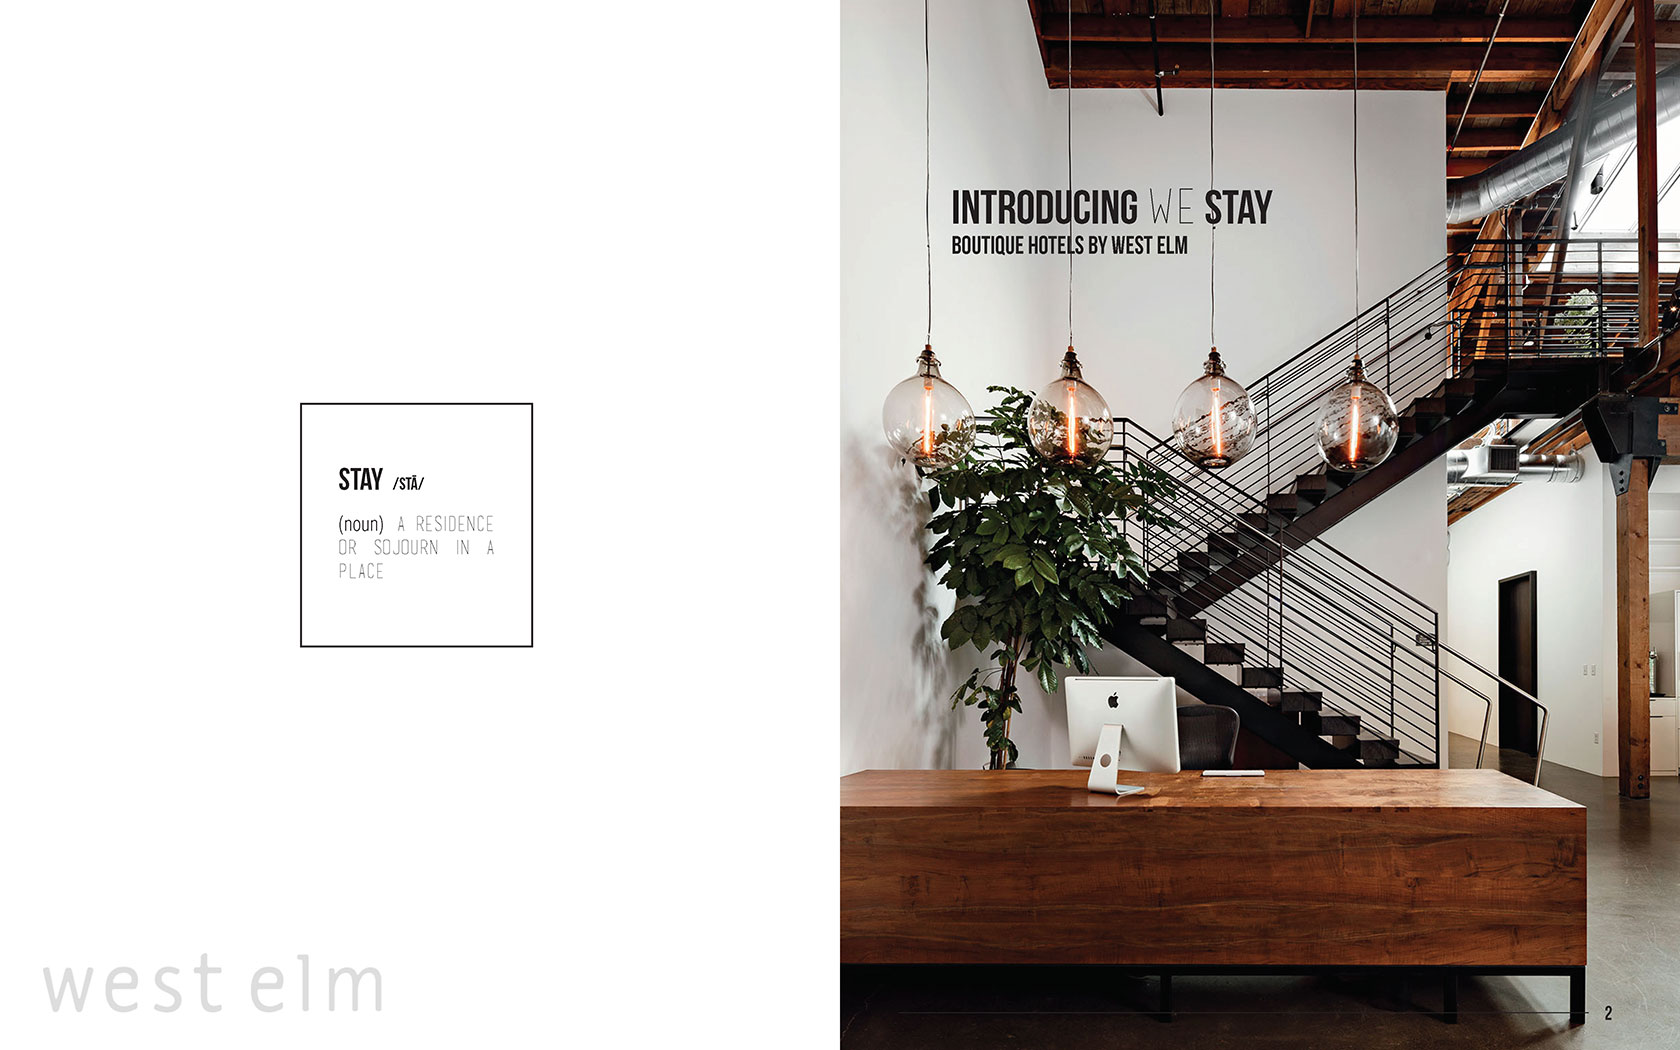 The cover of West Elm Hotel's pitch catalog